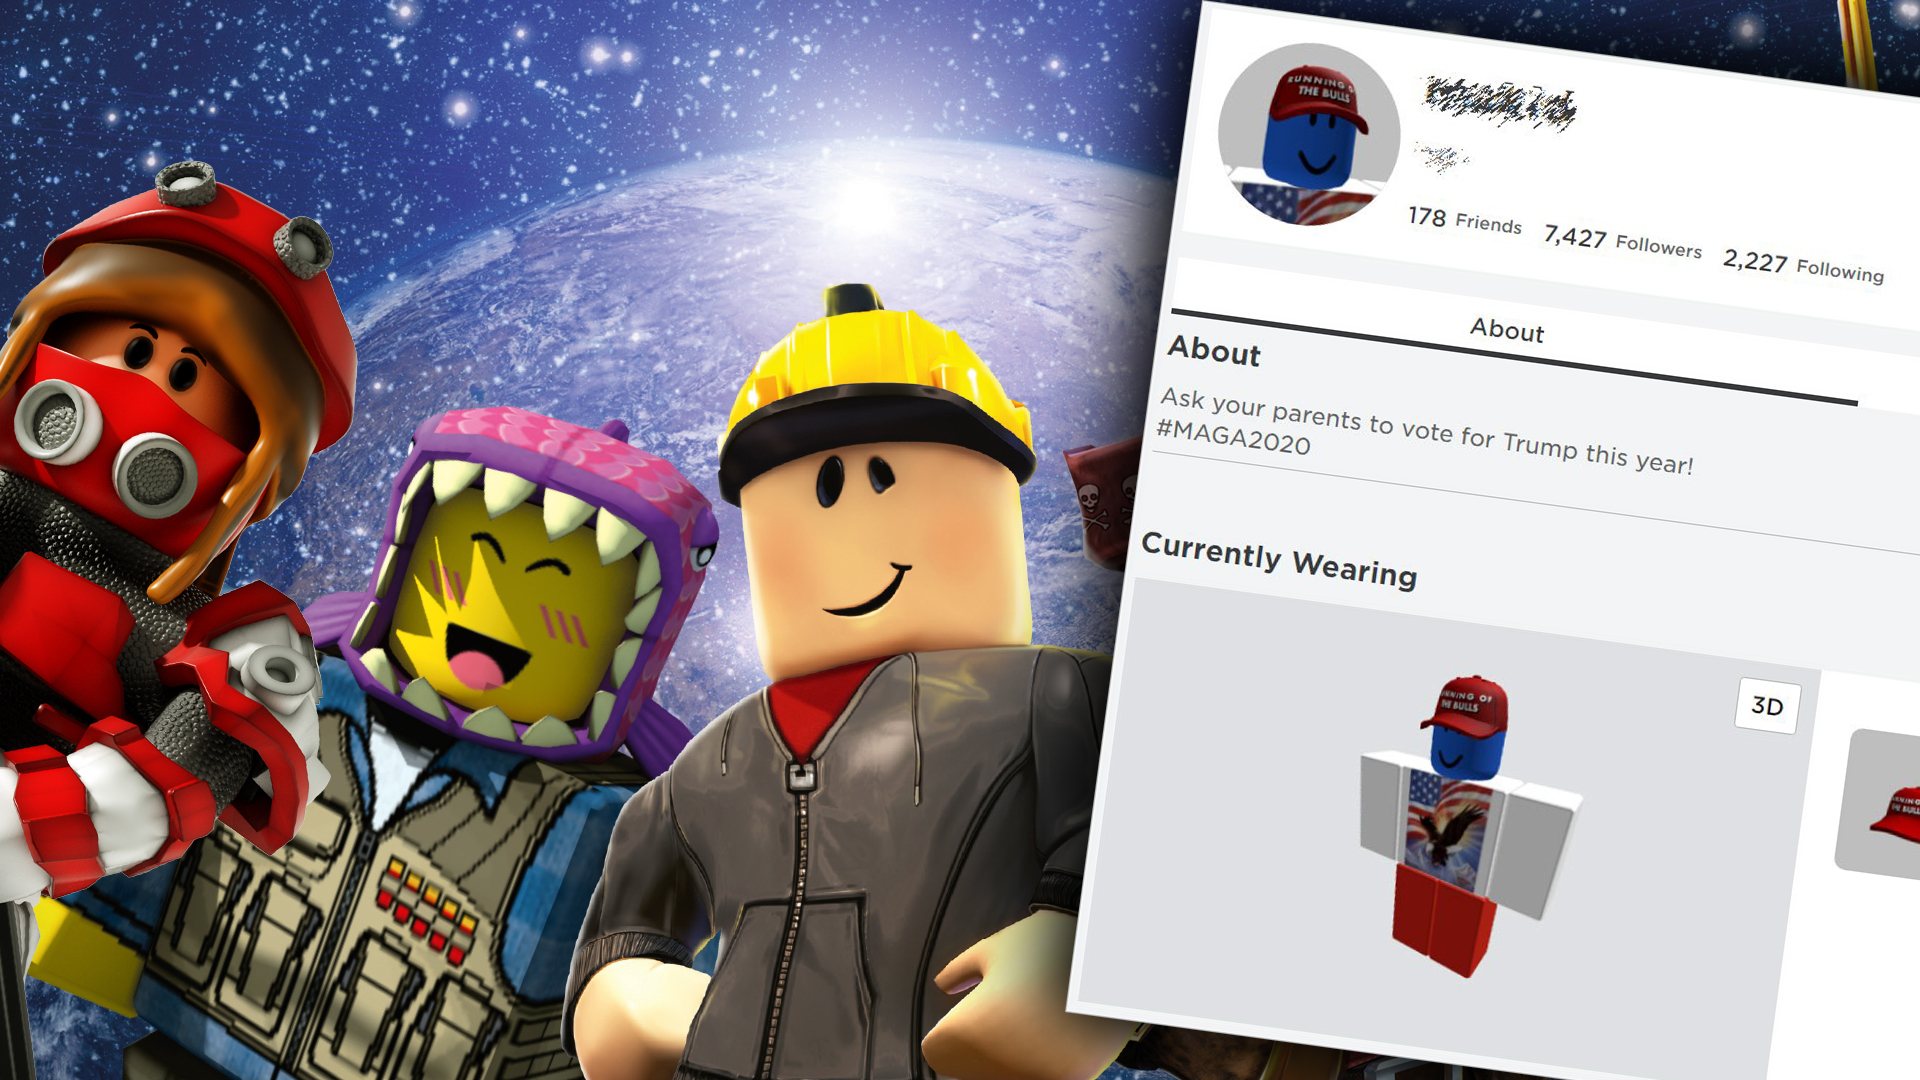 Over 1000 Roblox Accounts Hacked By Donald Trump Supporters